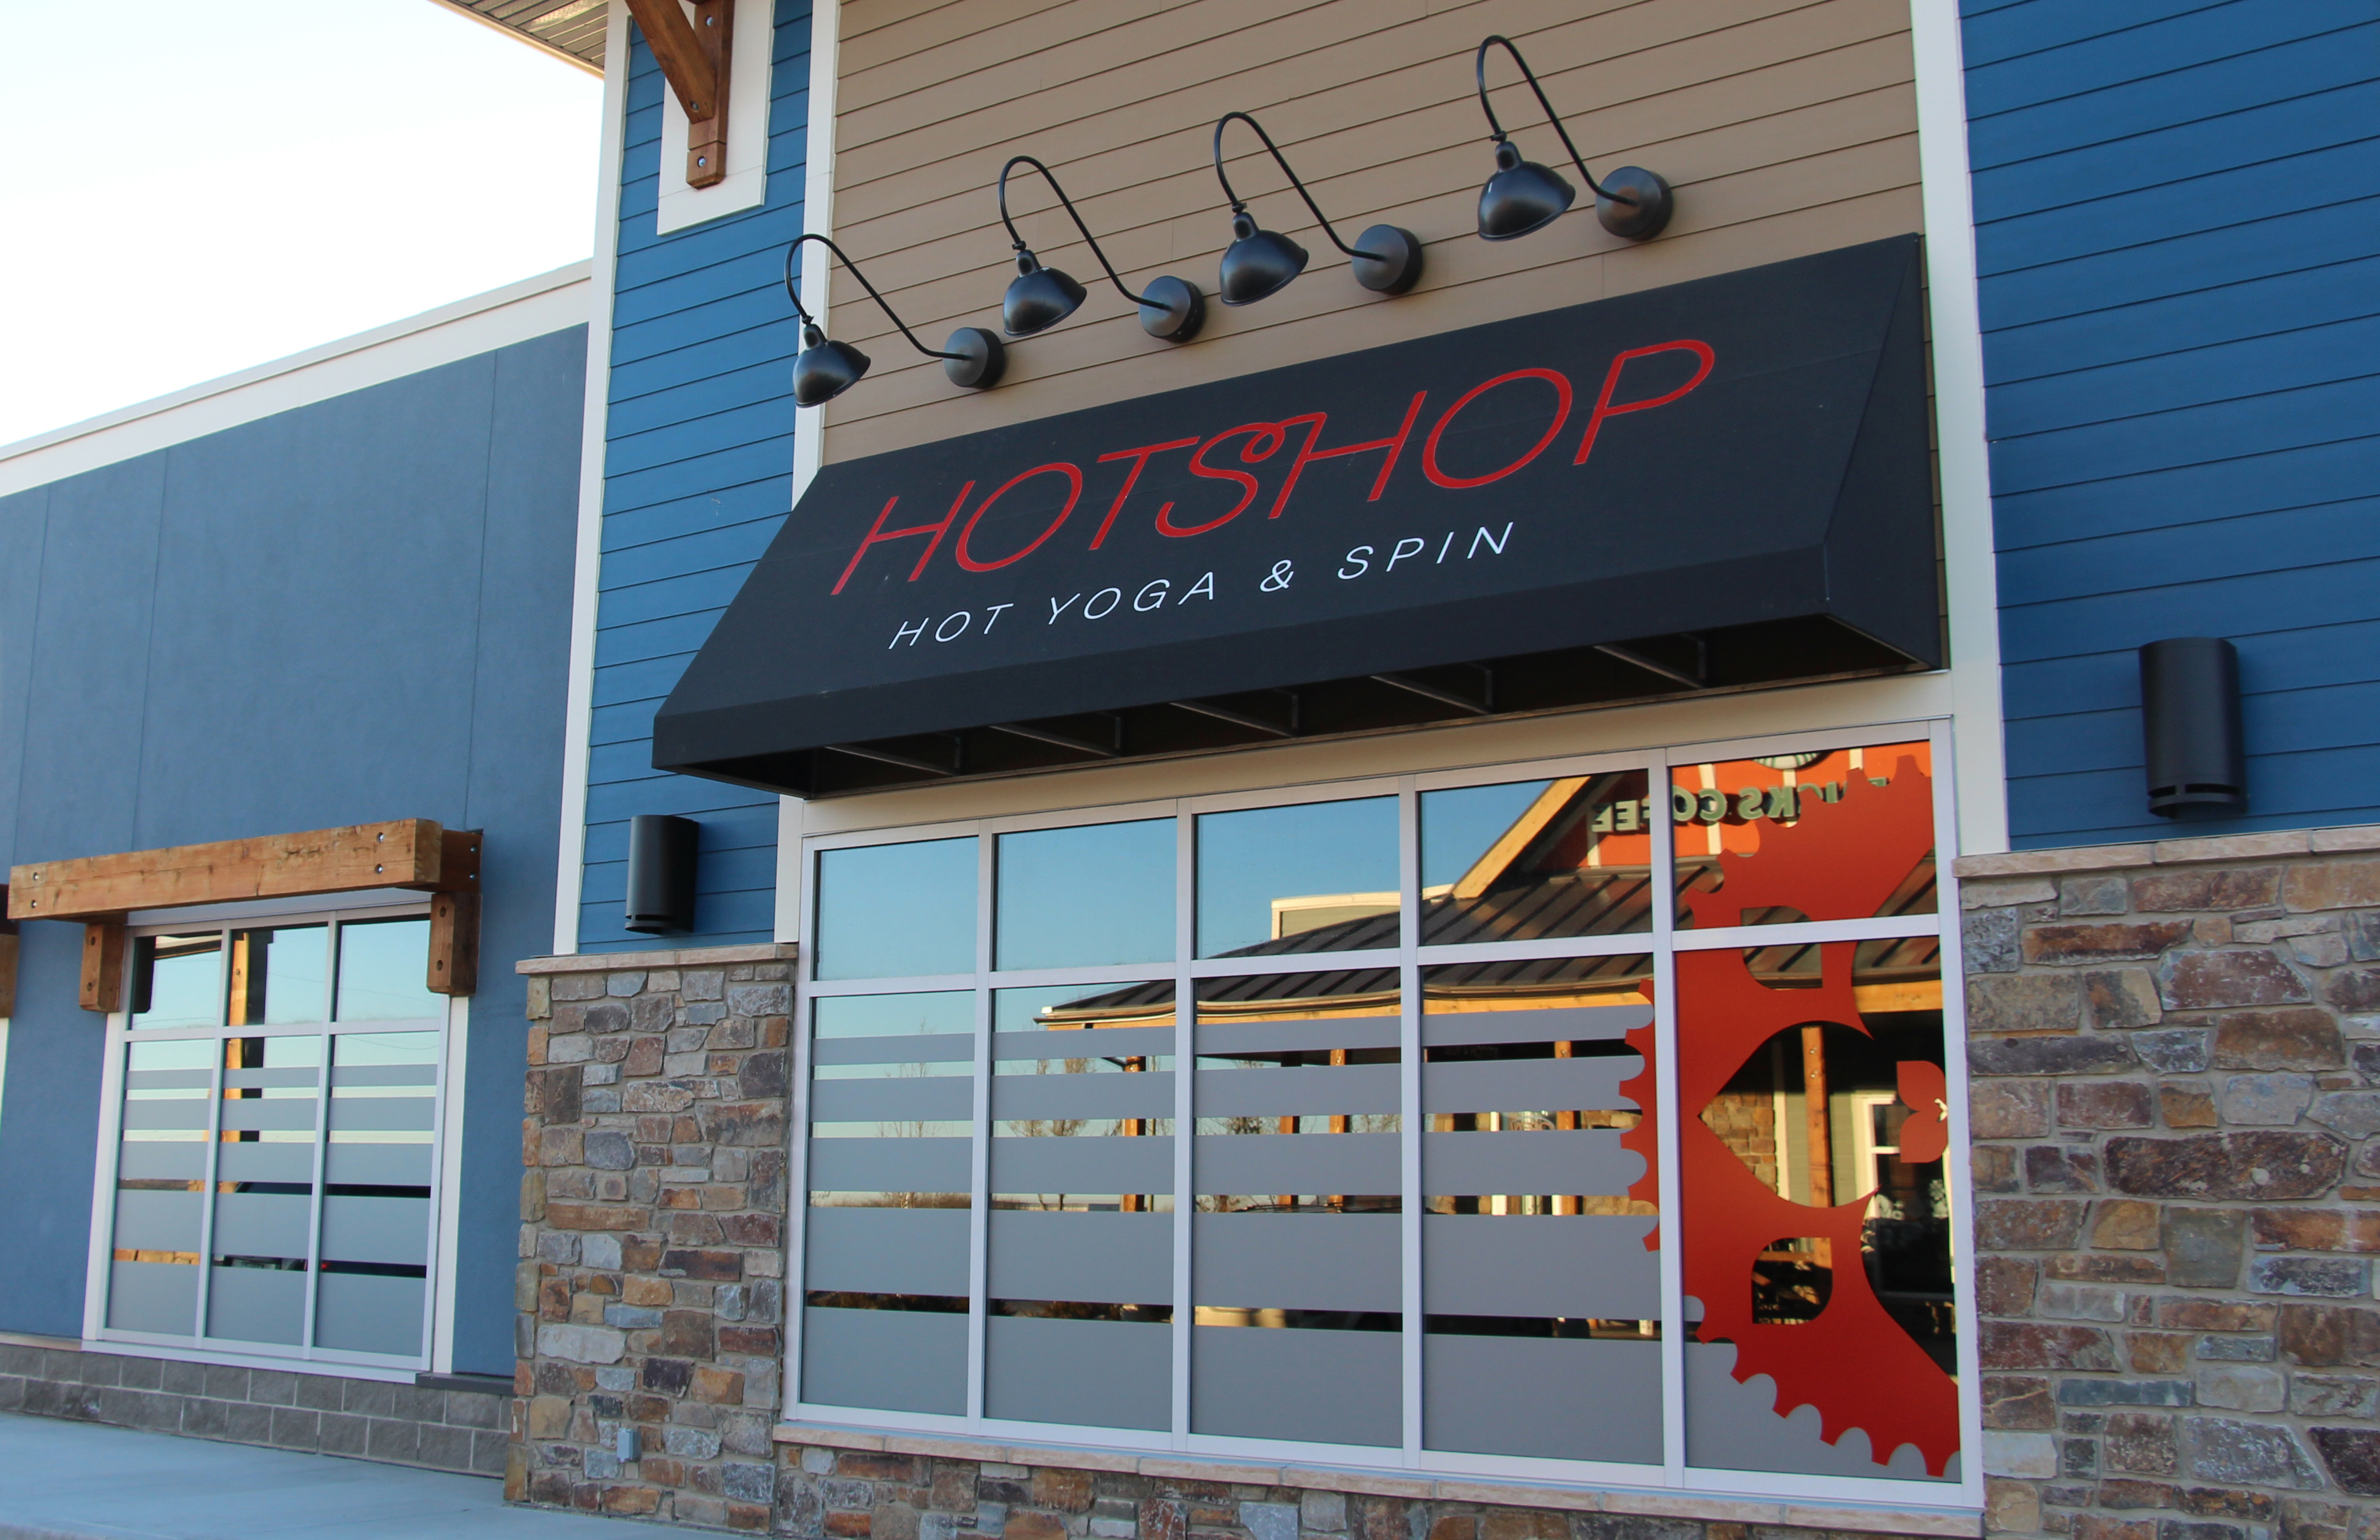 Frosted window etching alongside a red vinyl logo enhances this client's storefront.